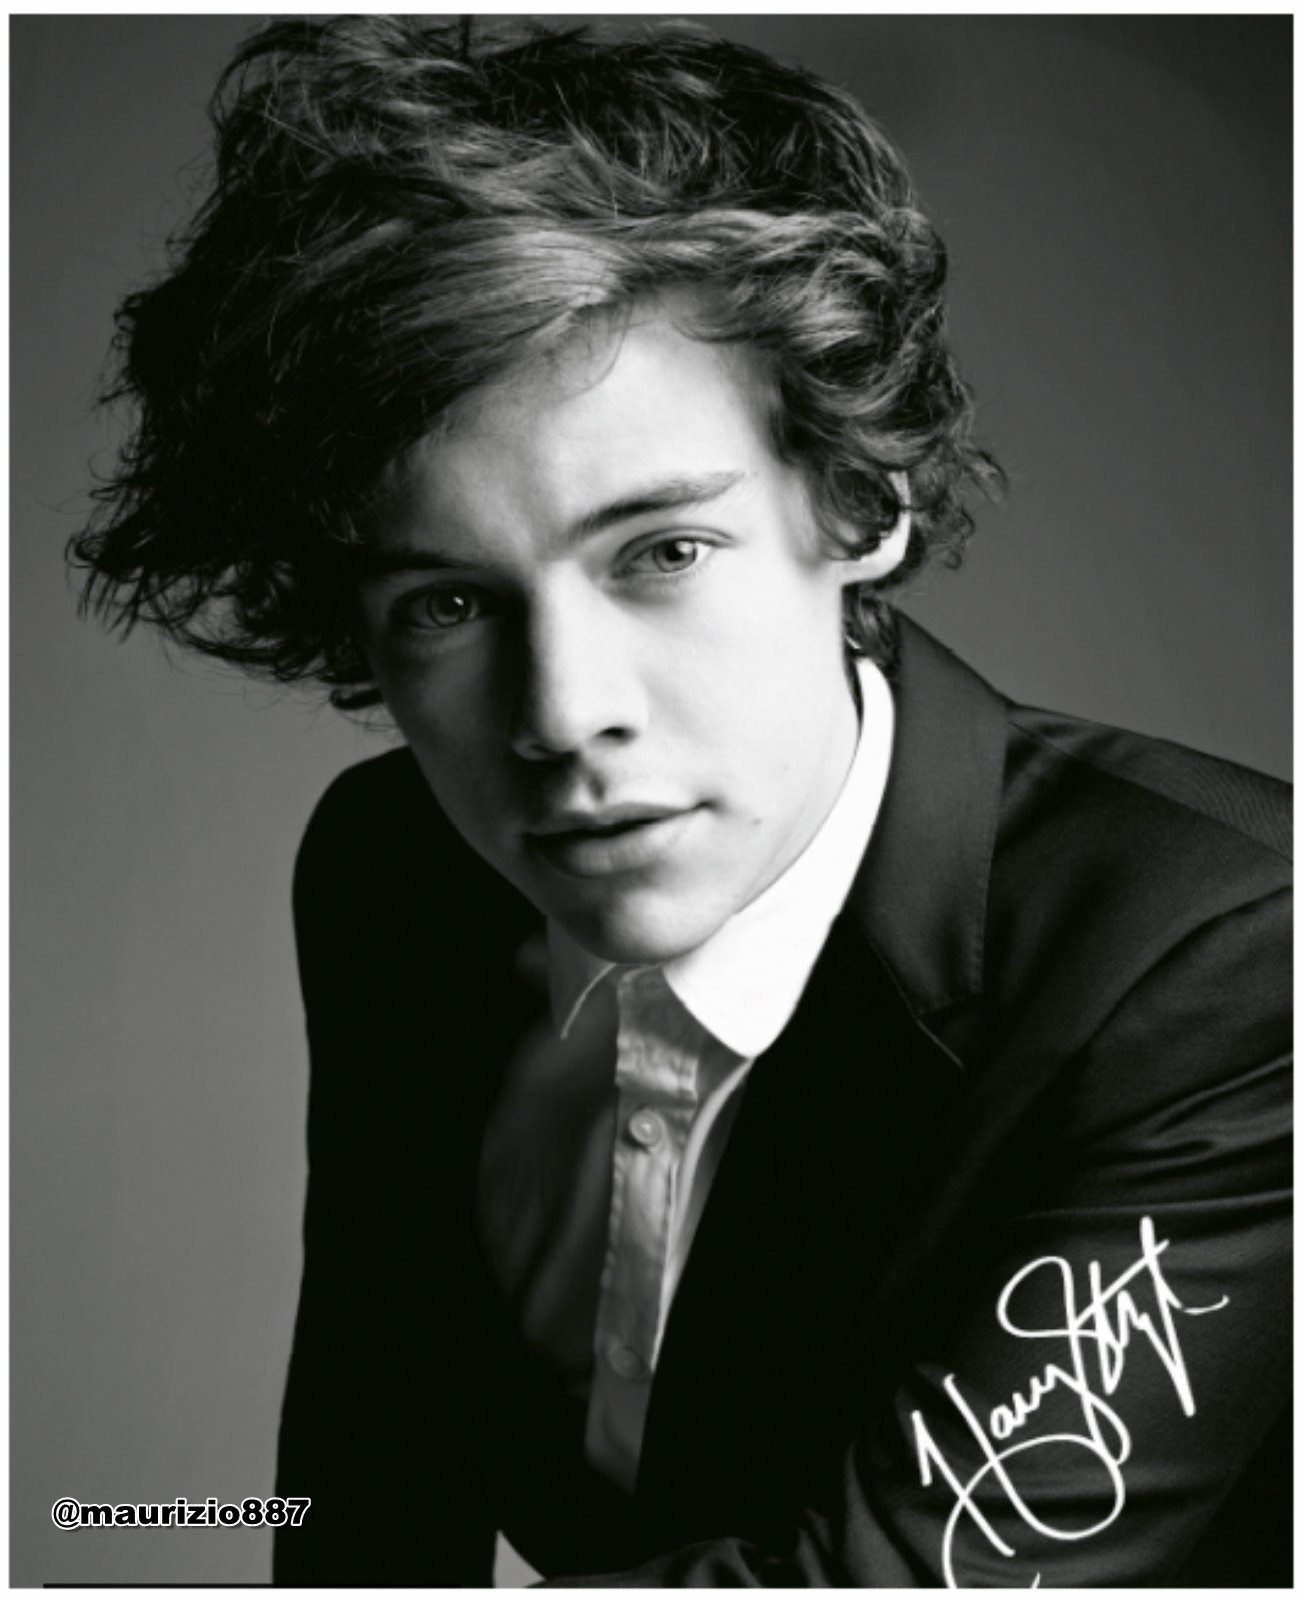 Harry-Styles-vogue-Photoshoots-2012-one-direction-32657326-1305-1600